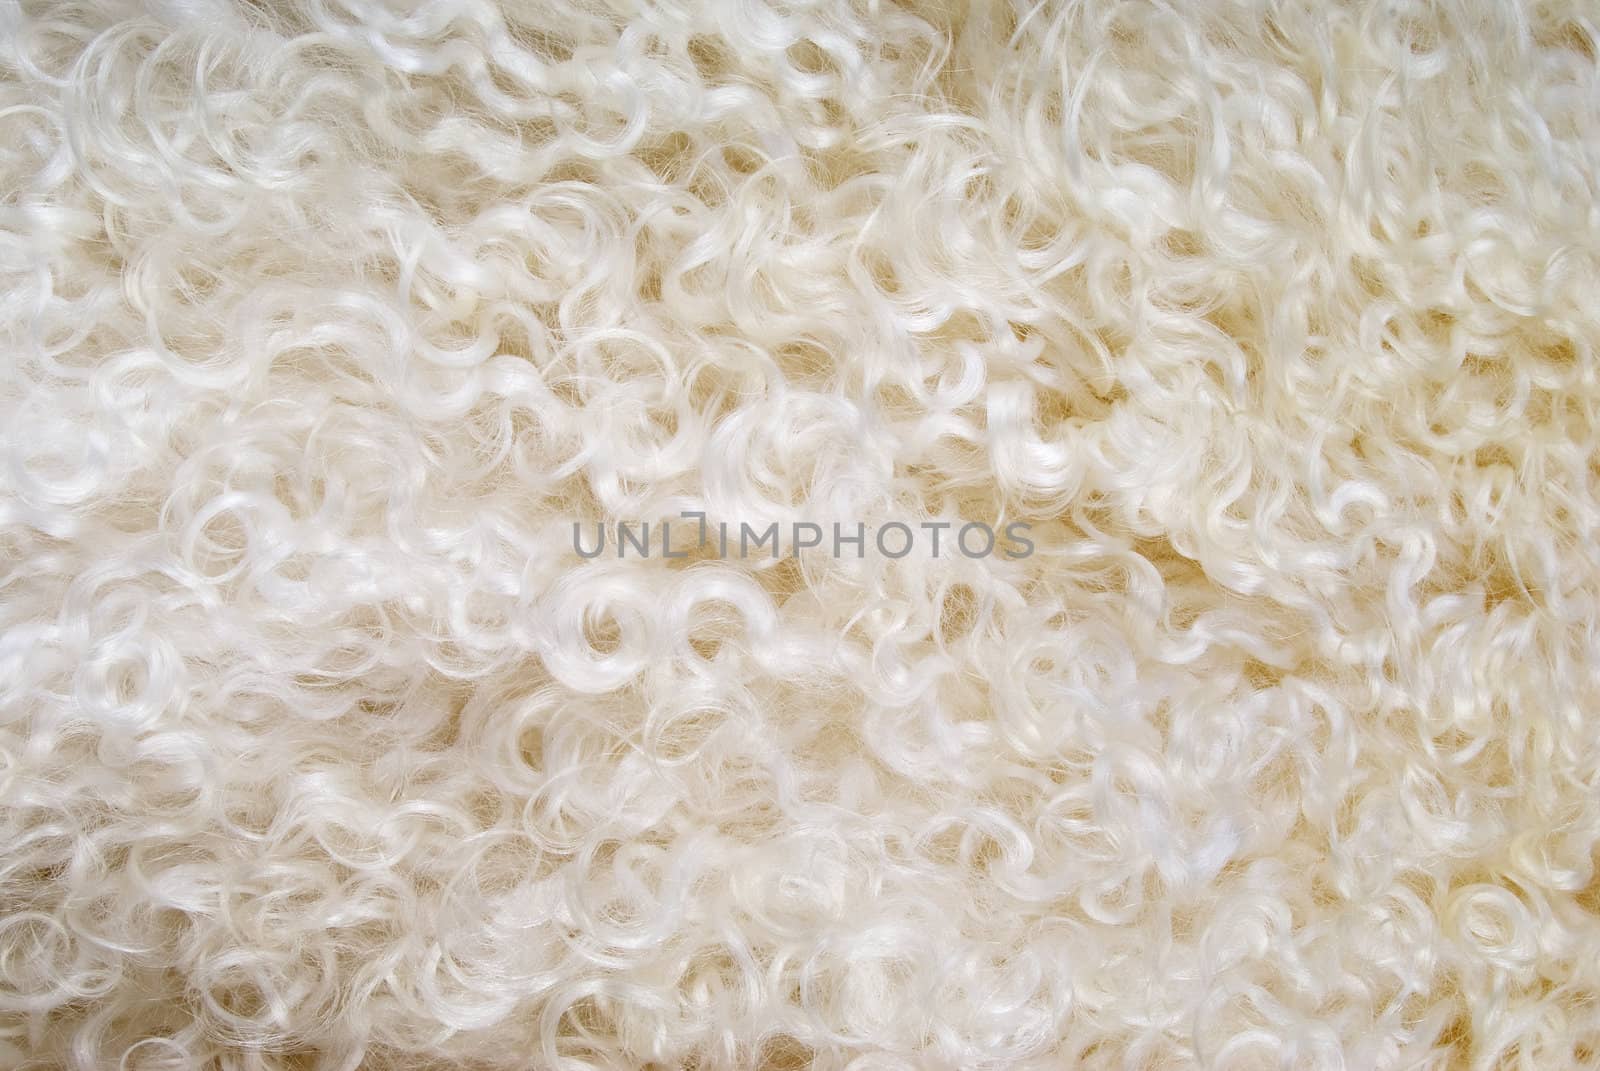 Background of sheepskin for collages or other works of art